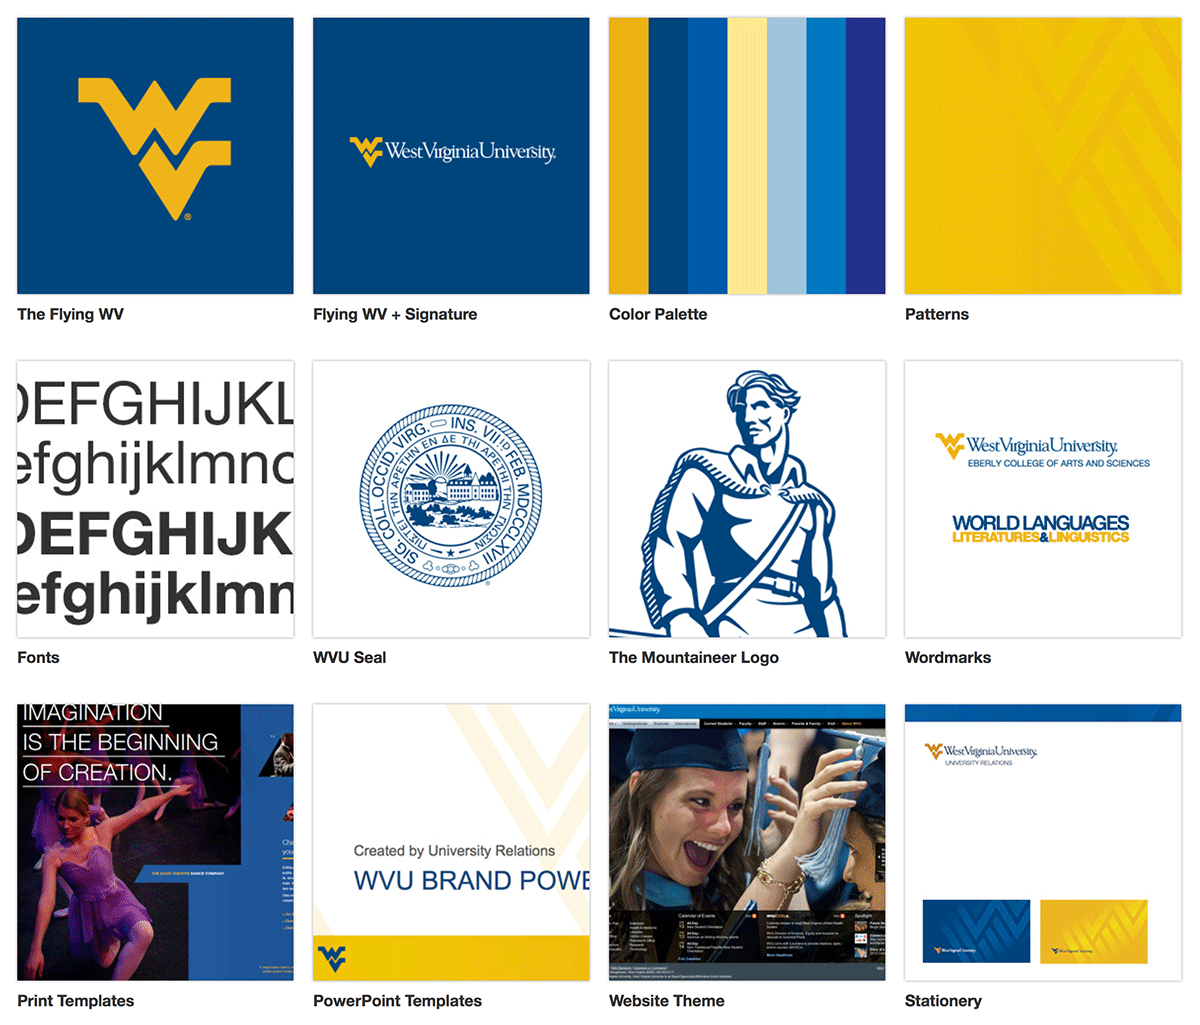 West Virginia University’s brand style guide.